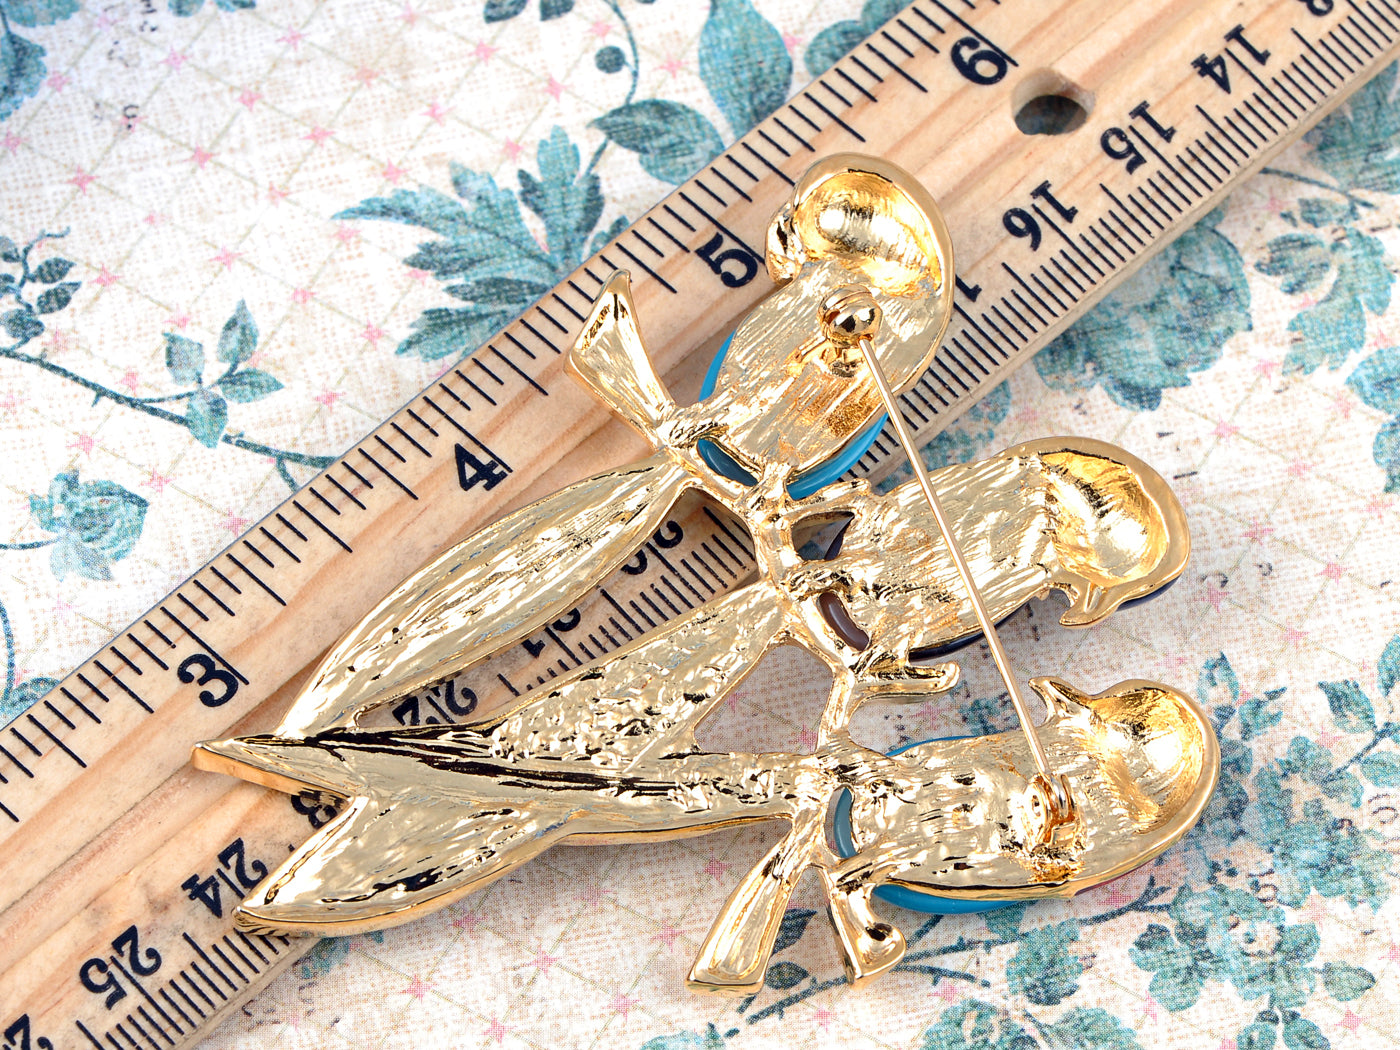 Elements Perched Trio Of Colorful Parakeets Bird Pin Brooch